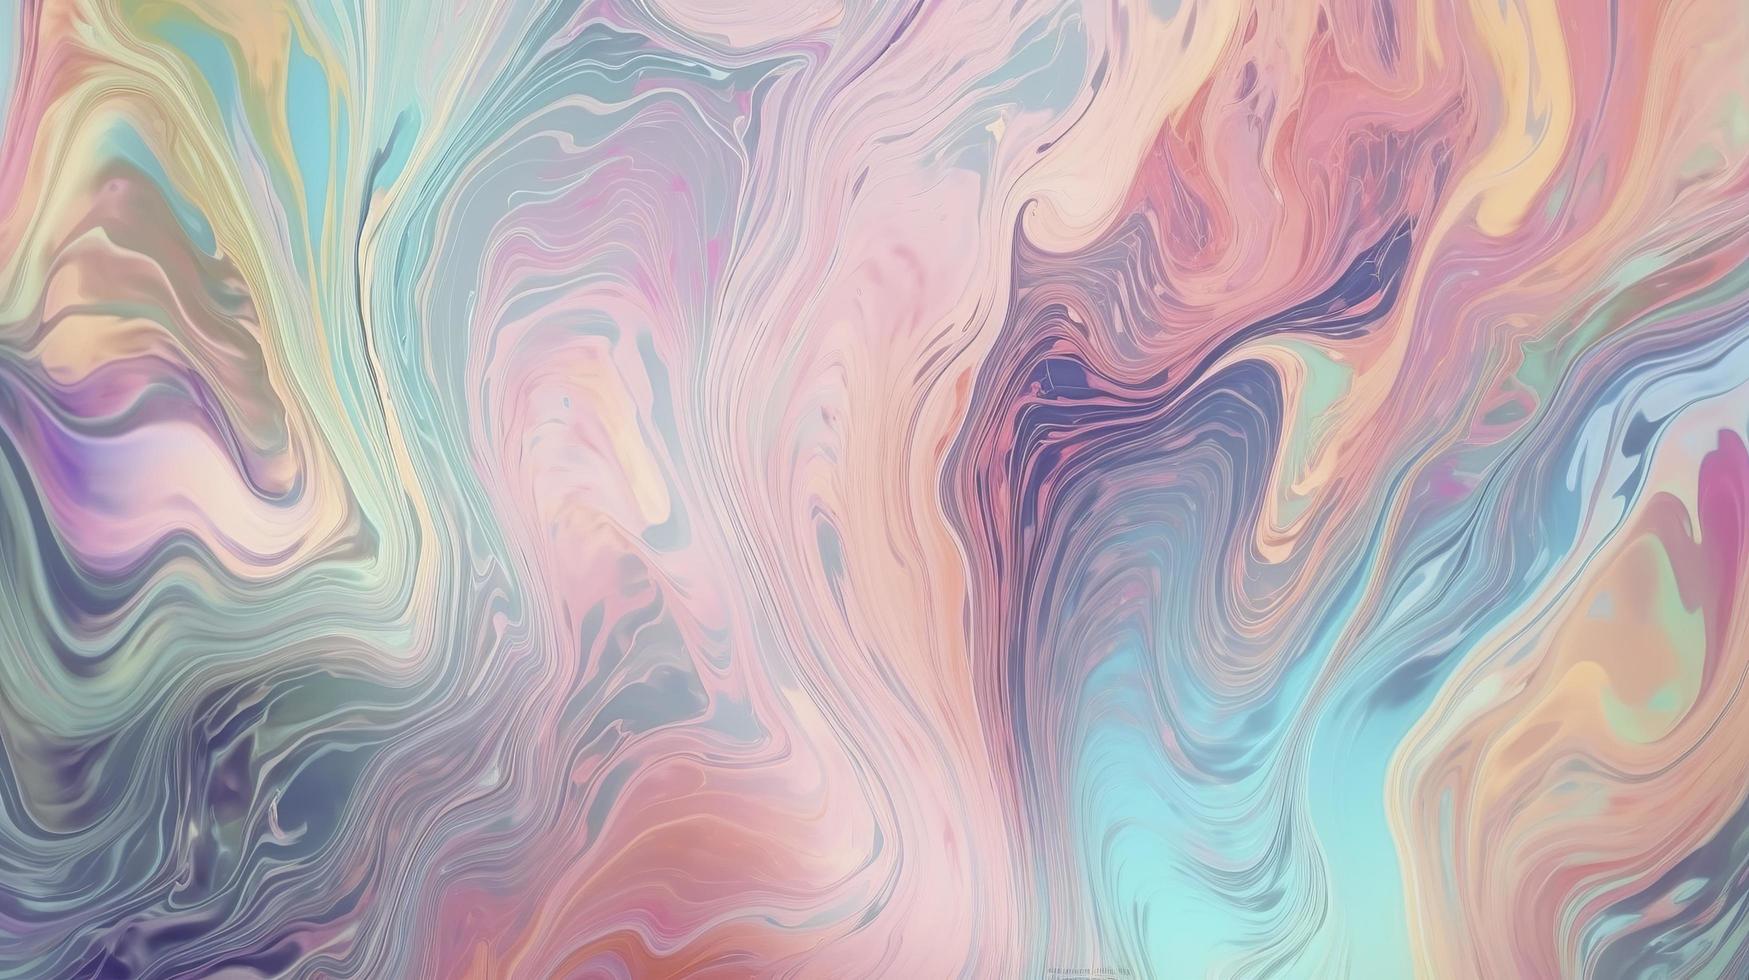 A marbled background of pastel colors - Iridescent, holographic